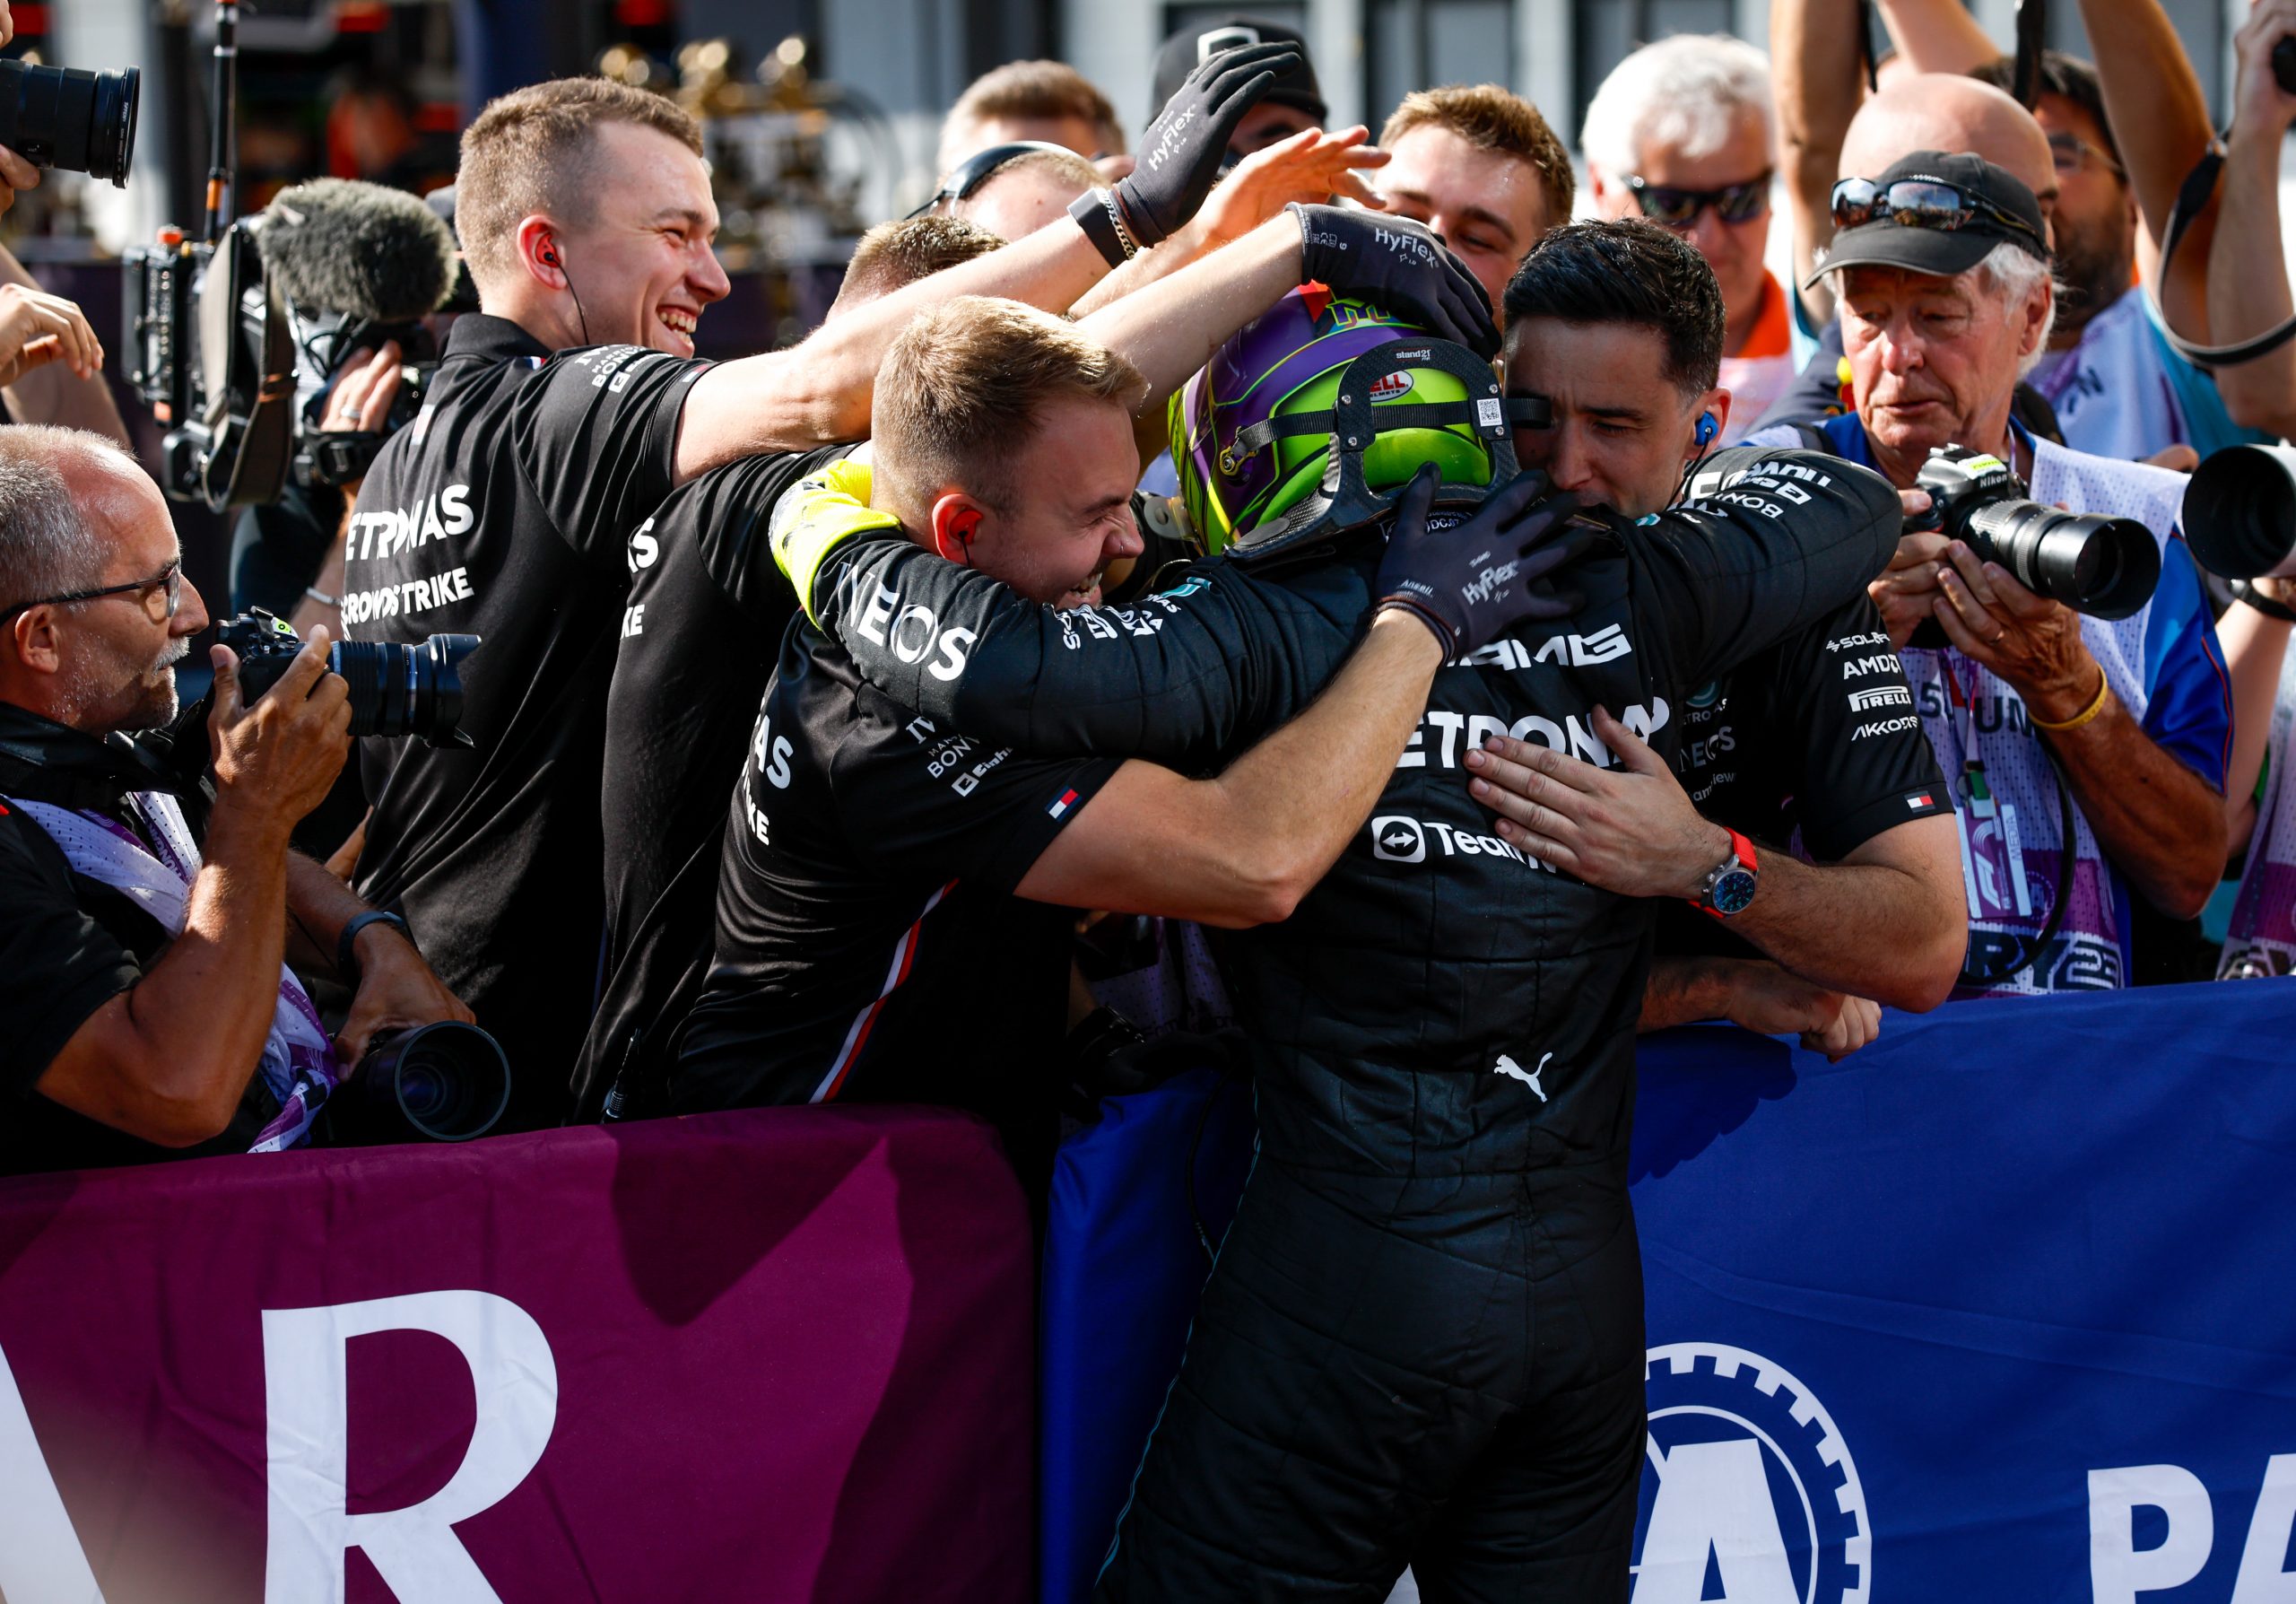 Lewis Hamilton (44) embraces his Mercedes team after capturing the pole at the Hungarian Grand Prix